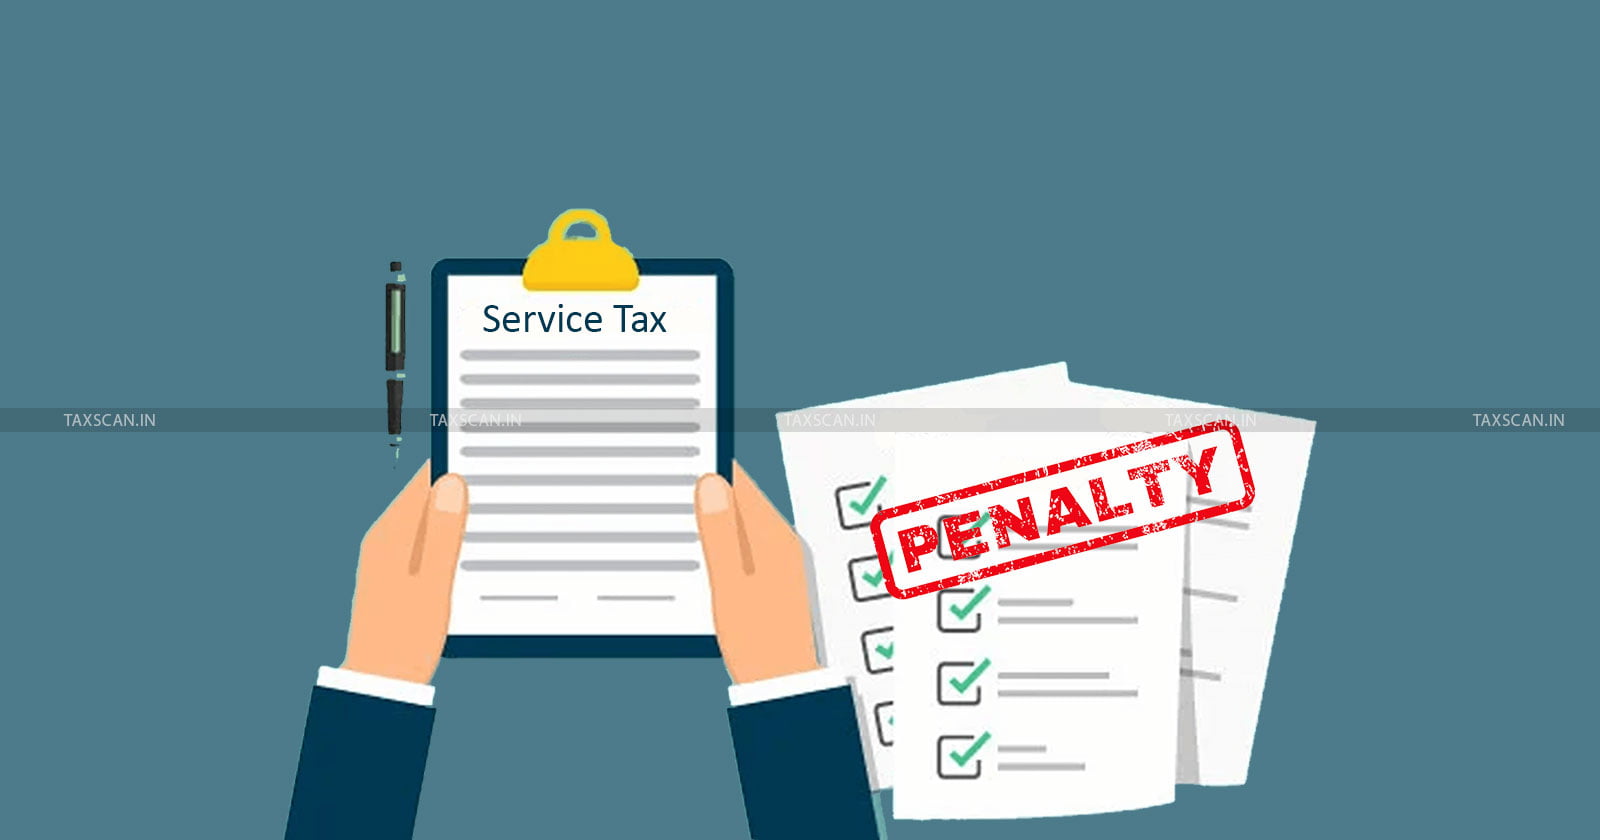 Service Tax - Penalty - Consignment - Consignment note - Transport of Goods - Punjab and Haryana High Court - Alternate Remedy - Taxscan